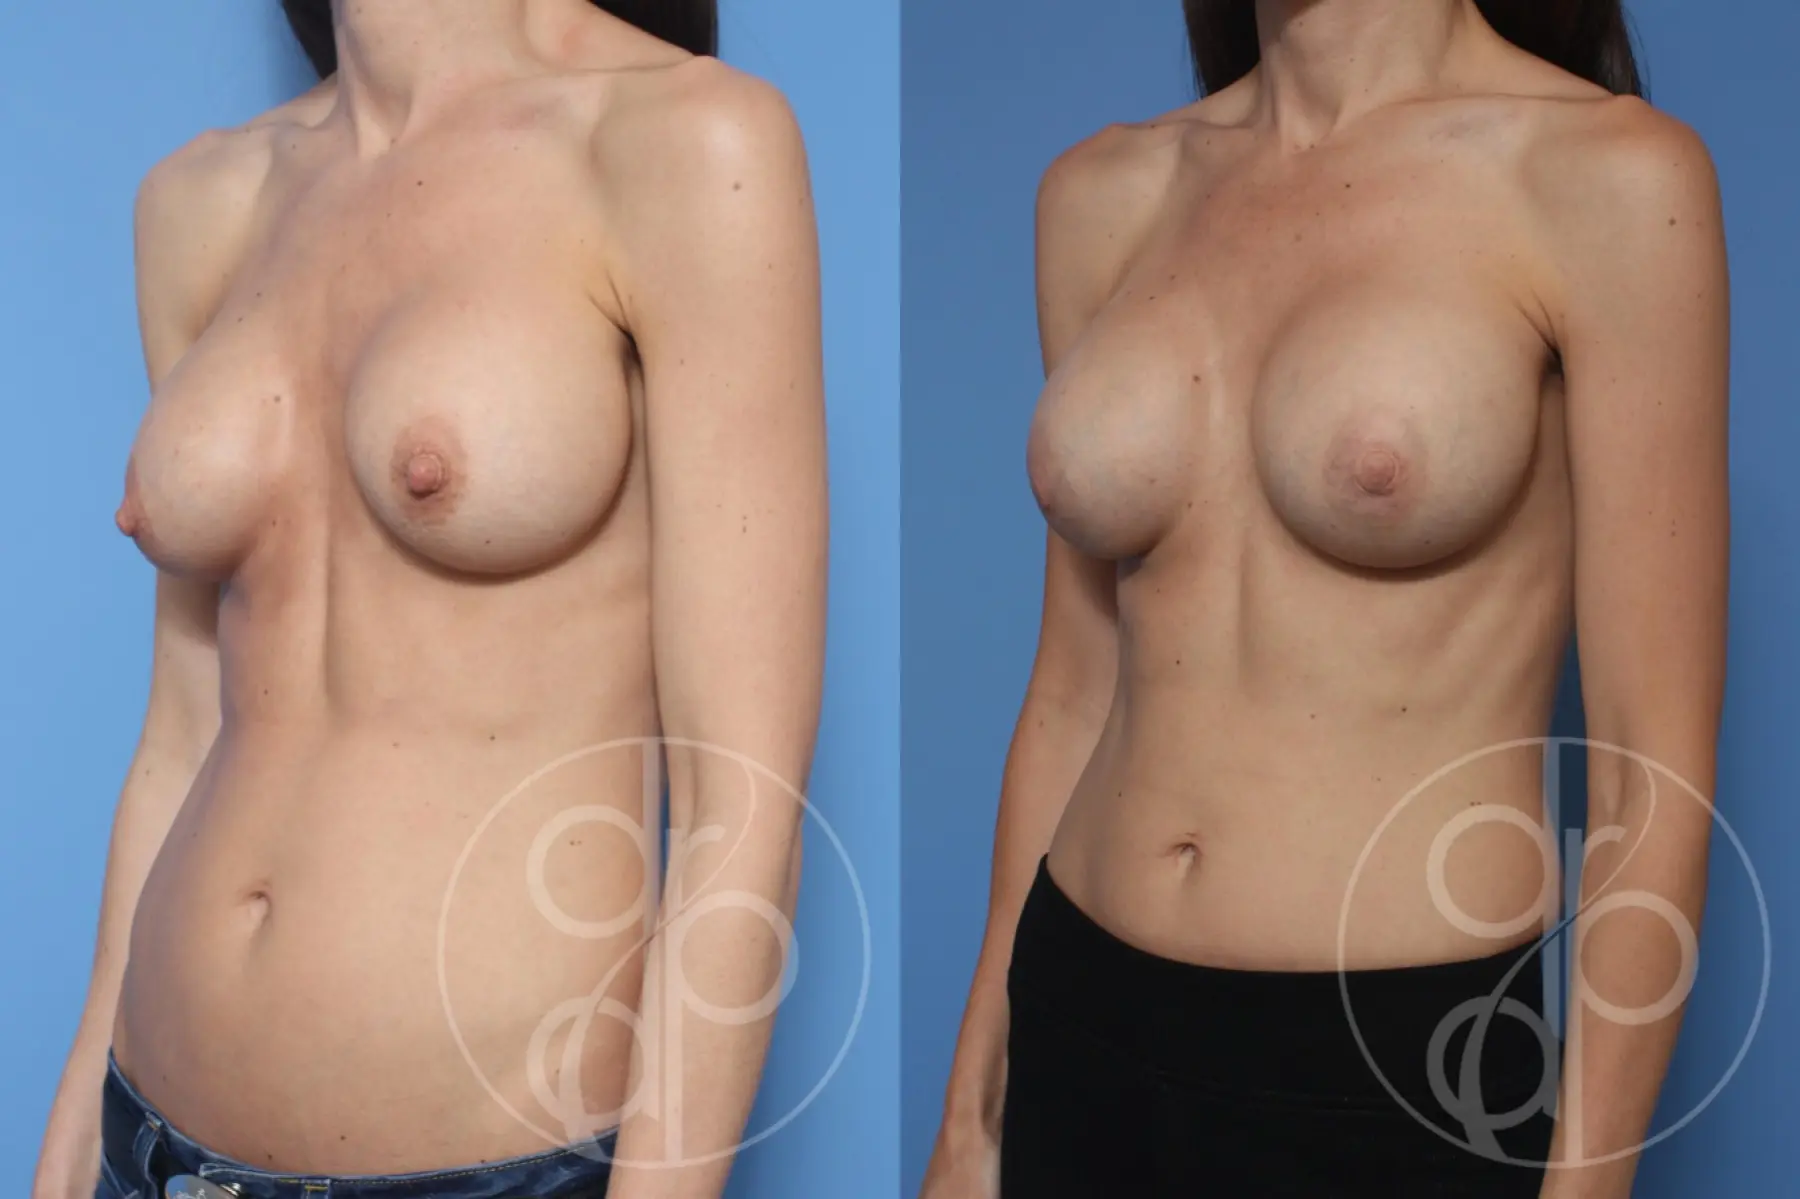 patient 10398 remove and replace breast implants before and after result - Before and After 2